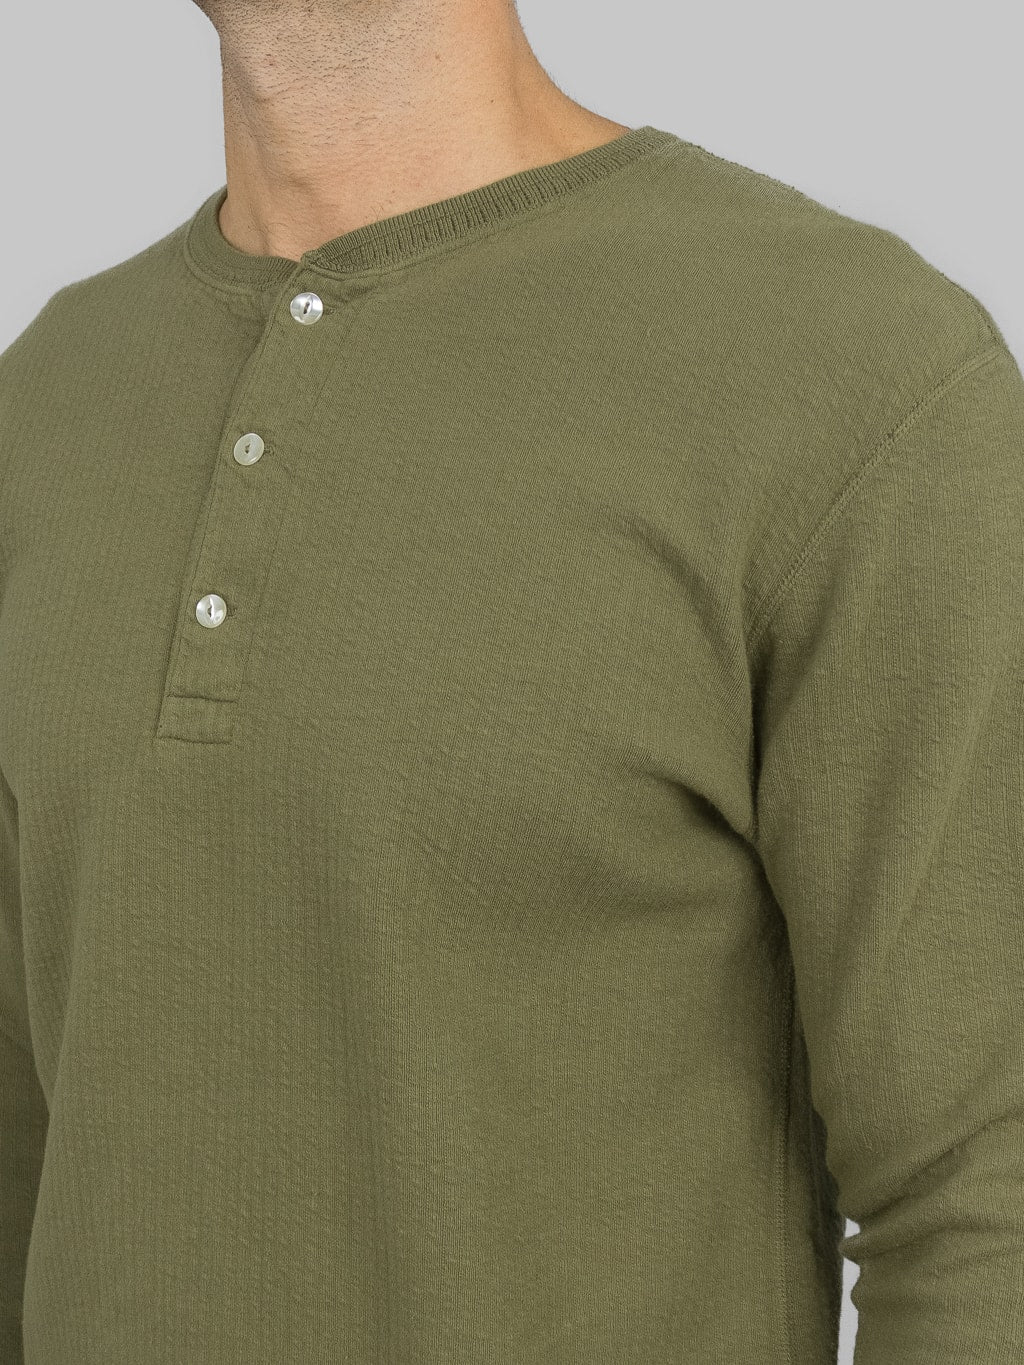 Loop Weft Double Face Jacquard henley Thermal army olive collar chest